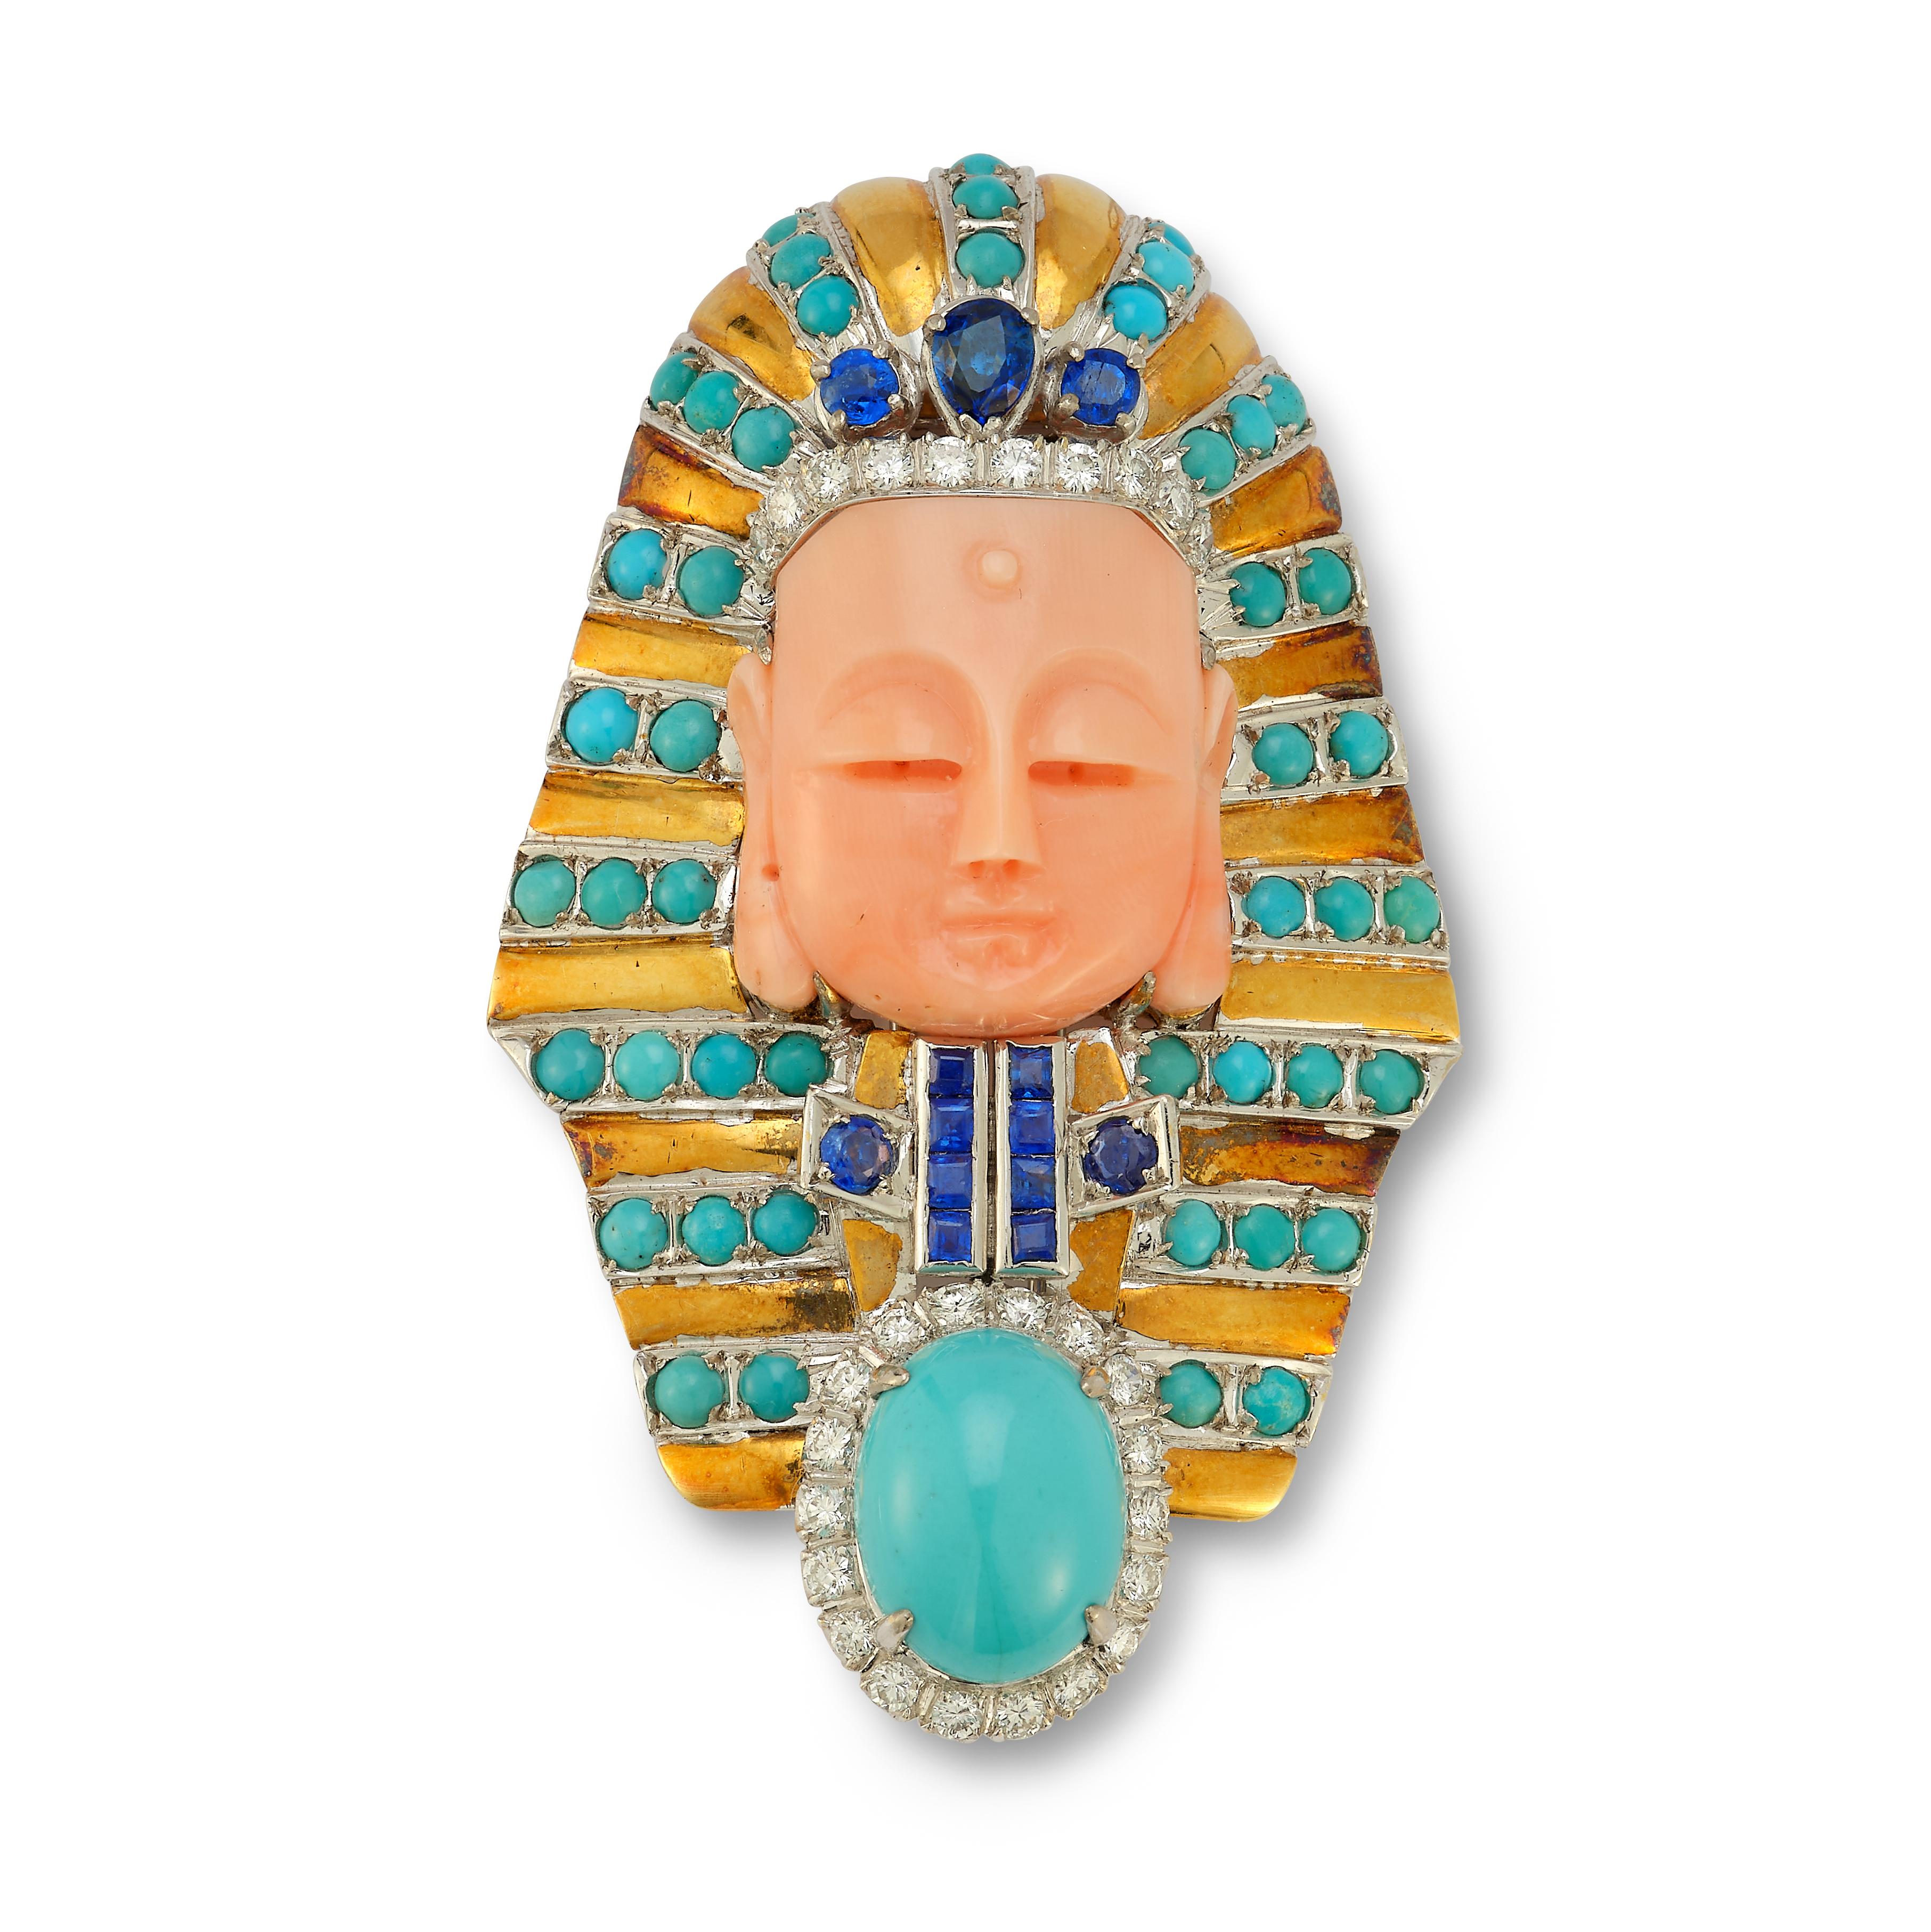 Coral & Turquoise Egyptian Mortive Brooch By Trio

1 carved coral face set with sapphires & cabochon turquoise  approximately .90 cts  & round cut diamonds approximately .65 cts.

Measurements: 2.5